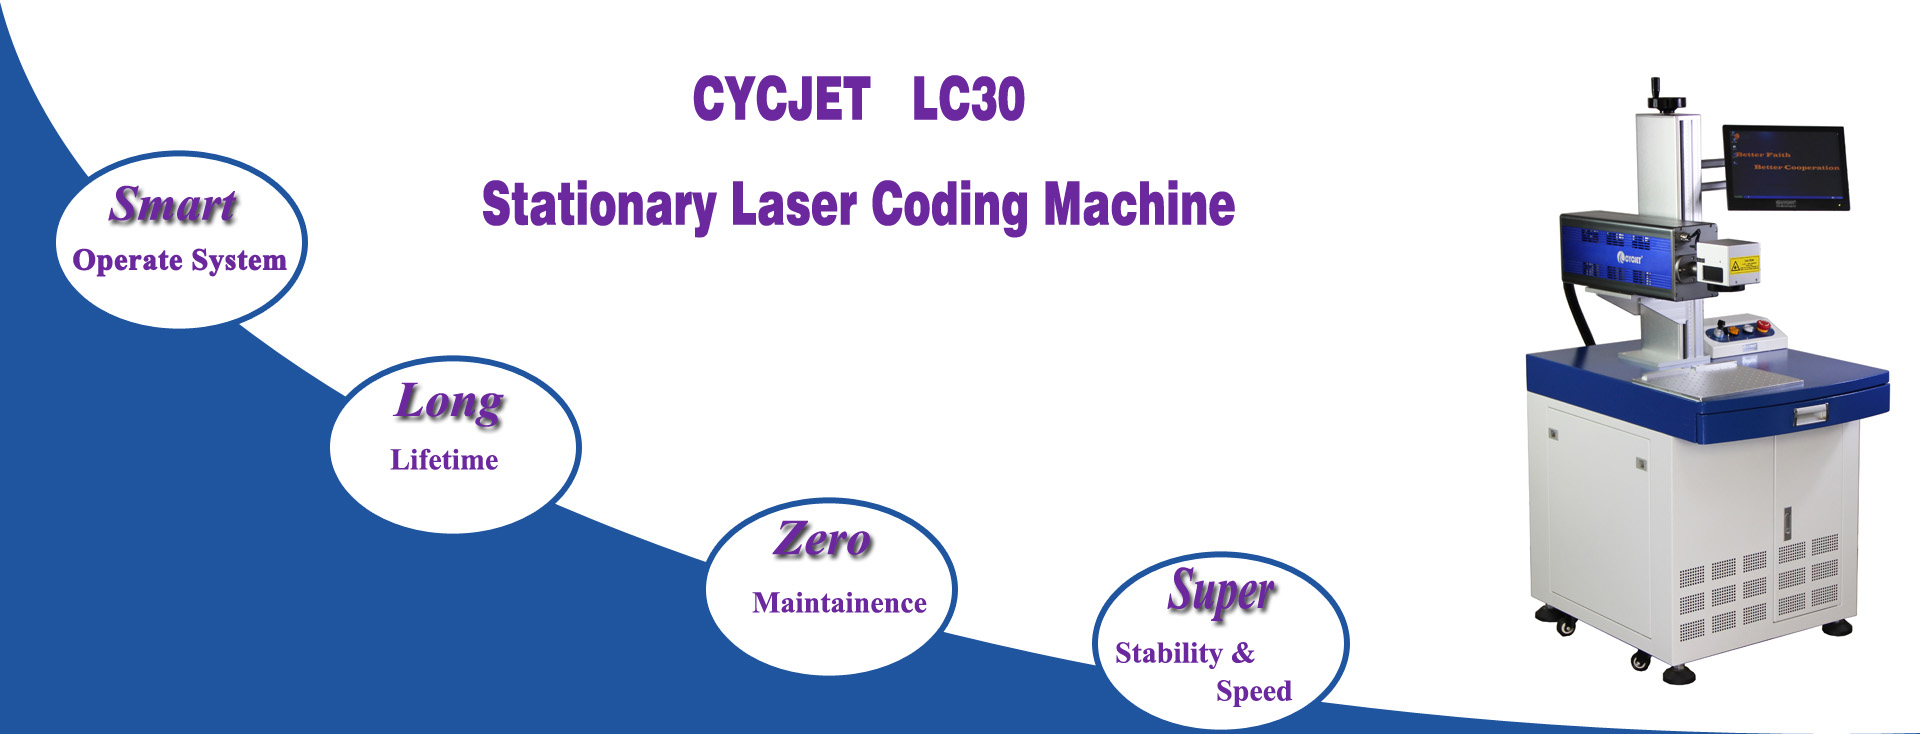 DETAILS OF CYCJET LC30 Stationary CO2 Laser Coding Machine.jpg